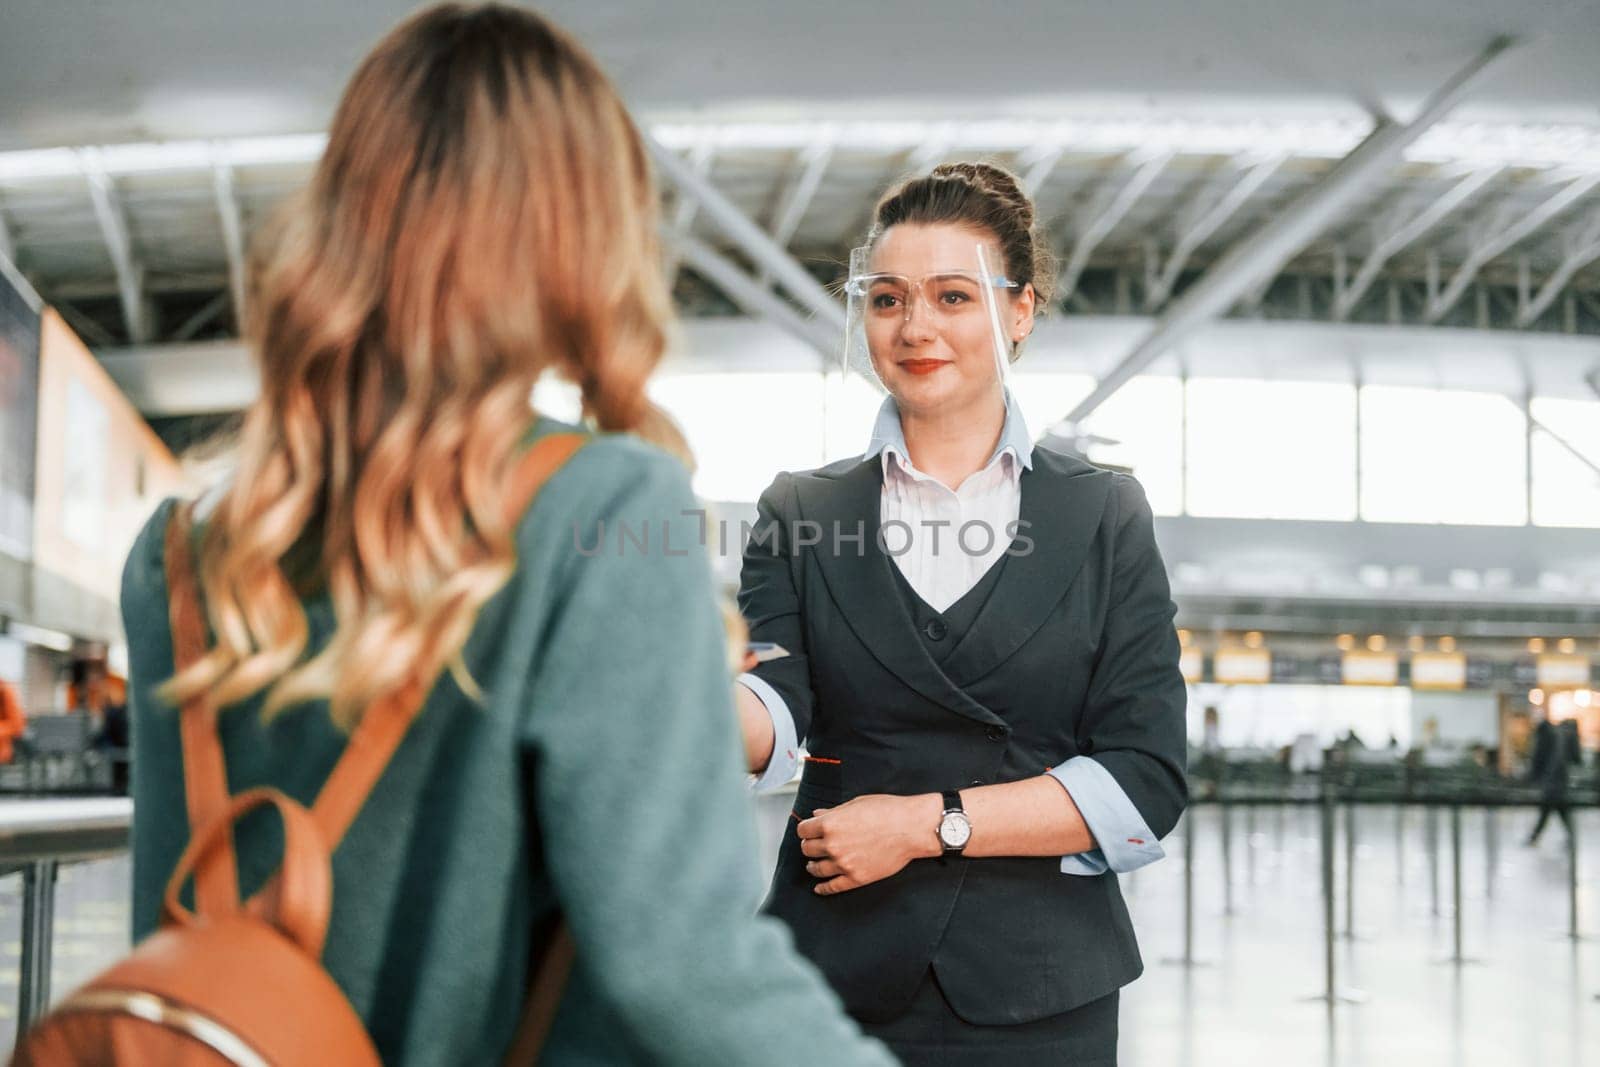 Pass procedure. Young female tourist is in the airport at daytime.